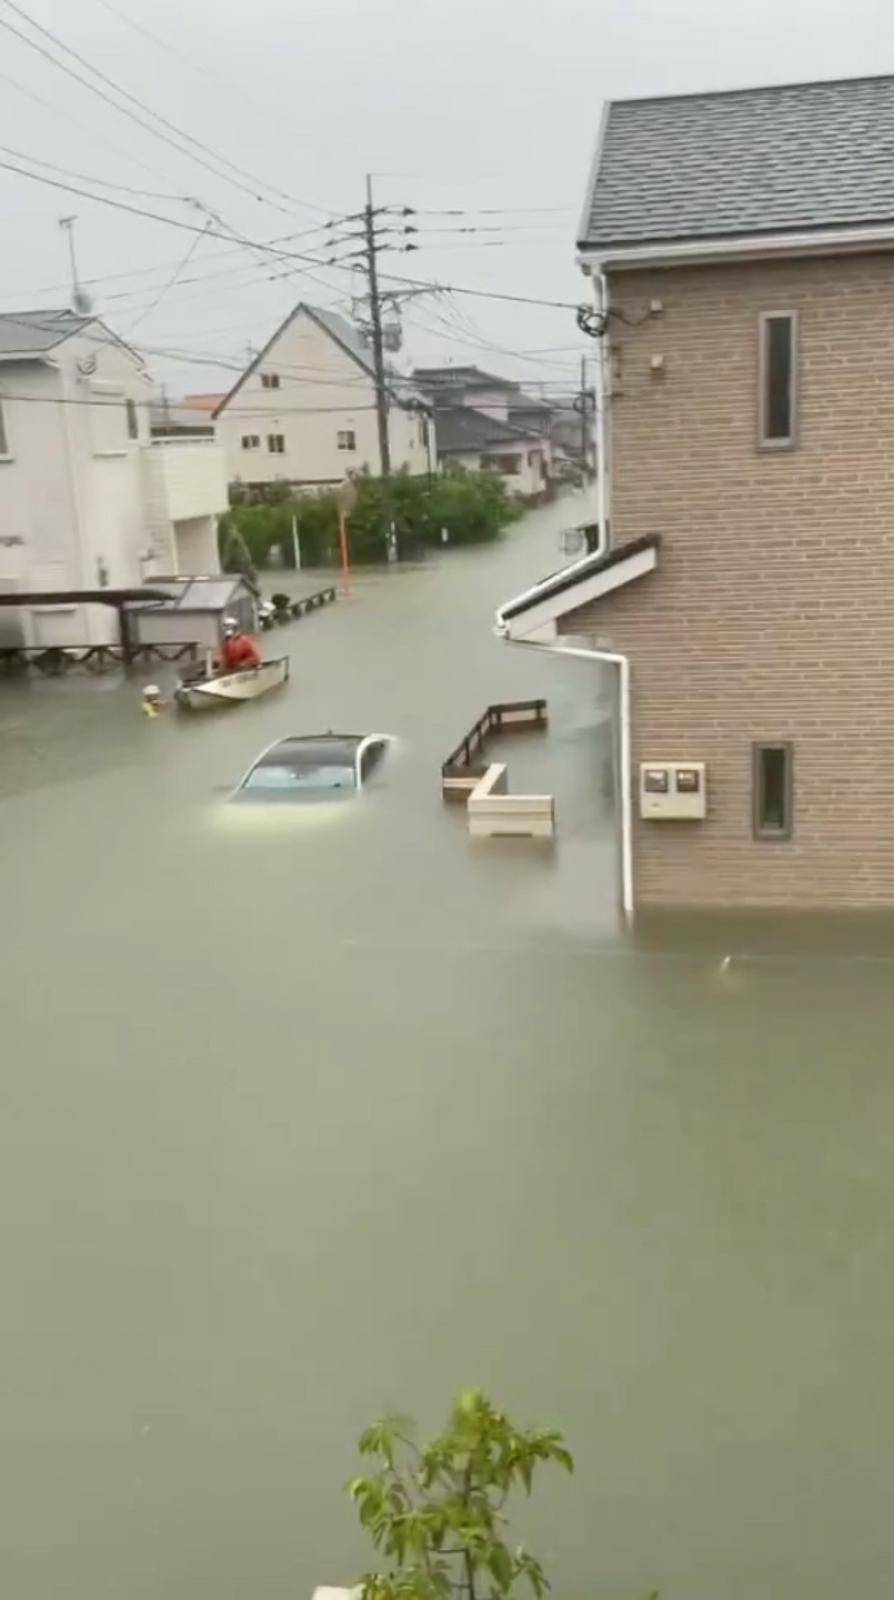 Rescue workers move past a partially submerged vehicle on a flooded street in Kurume